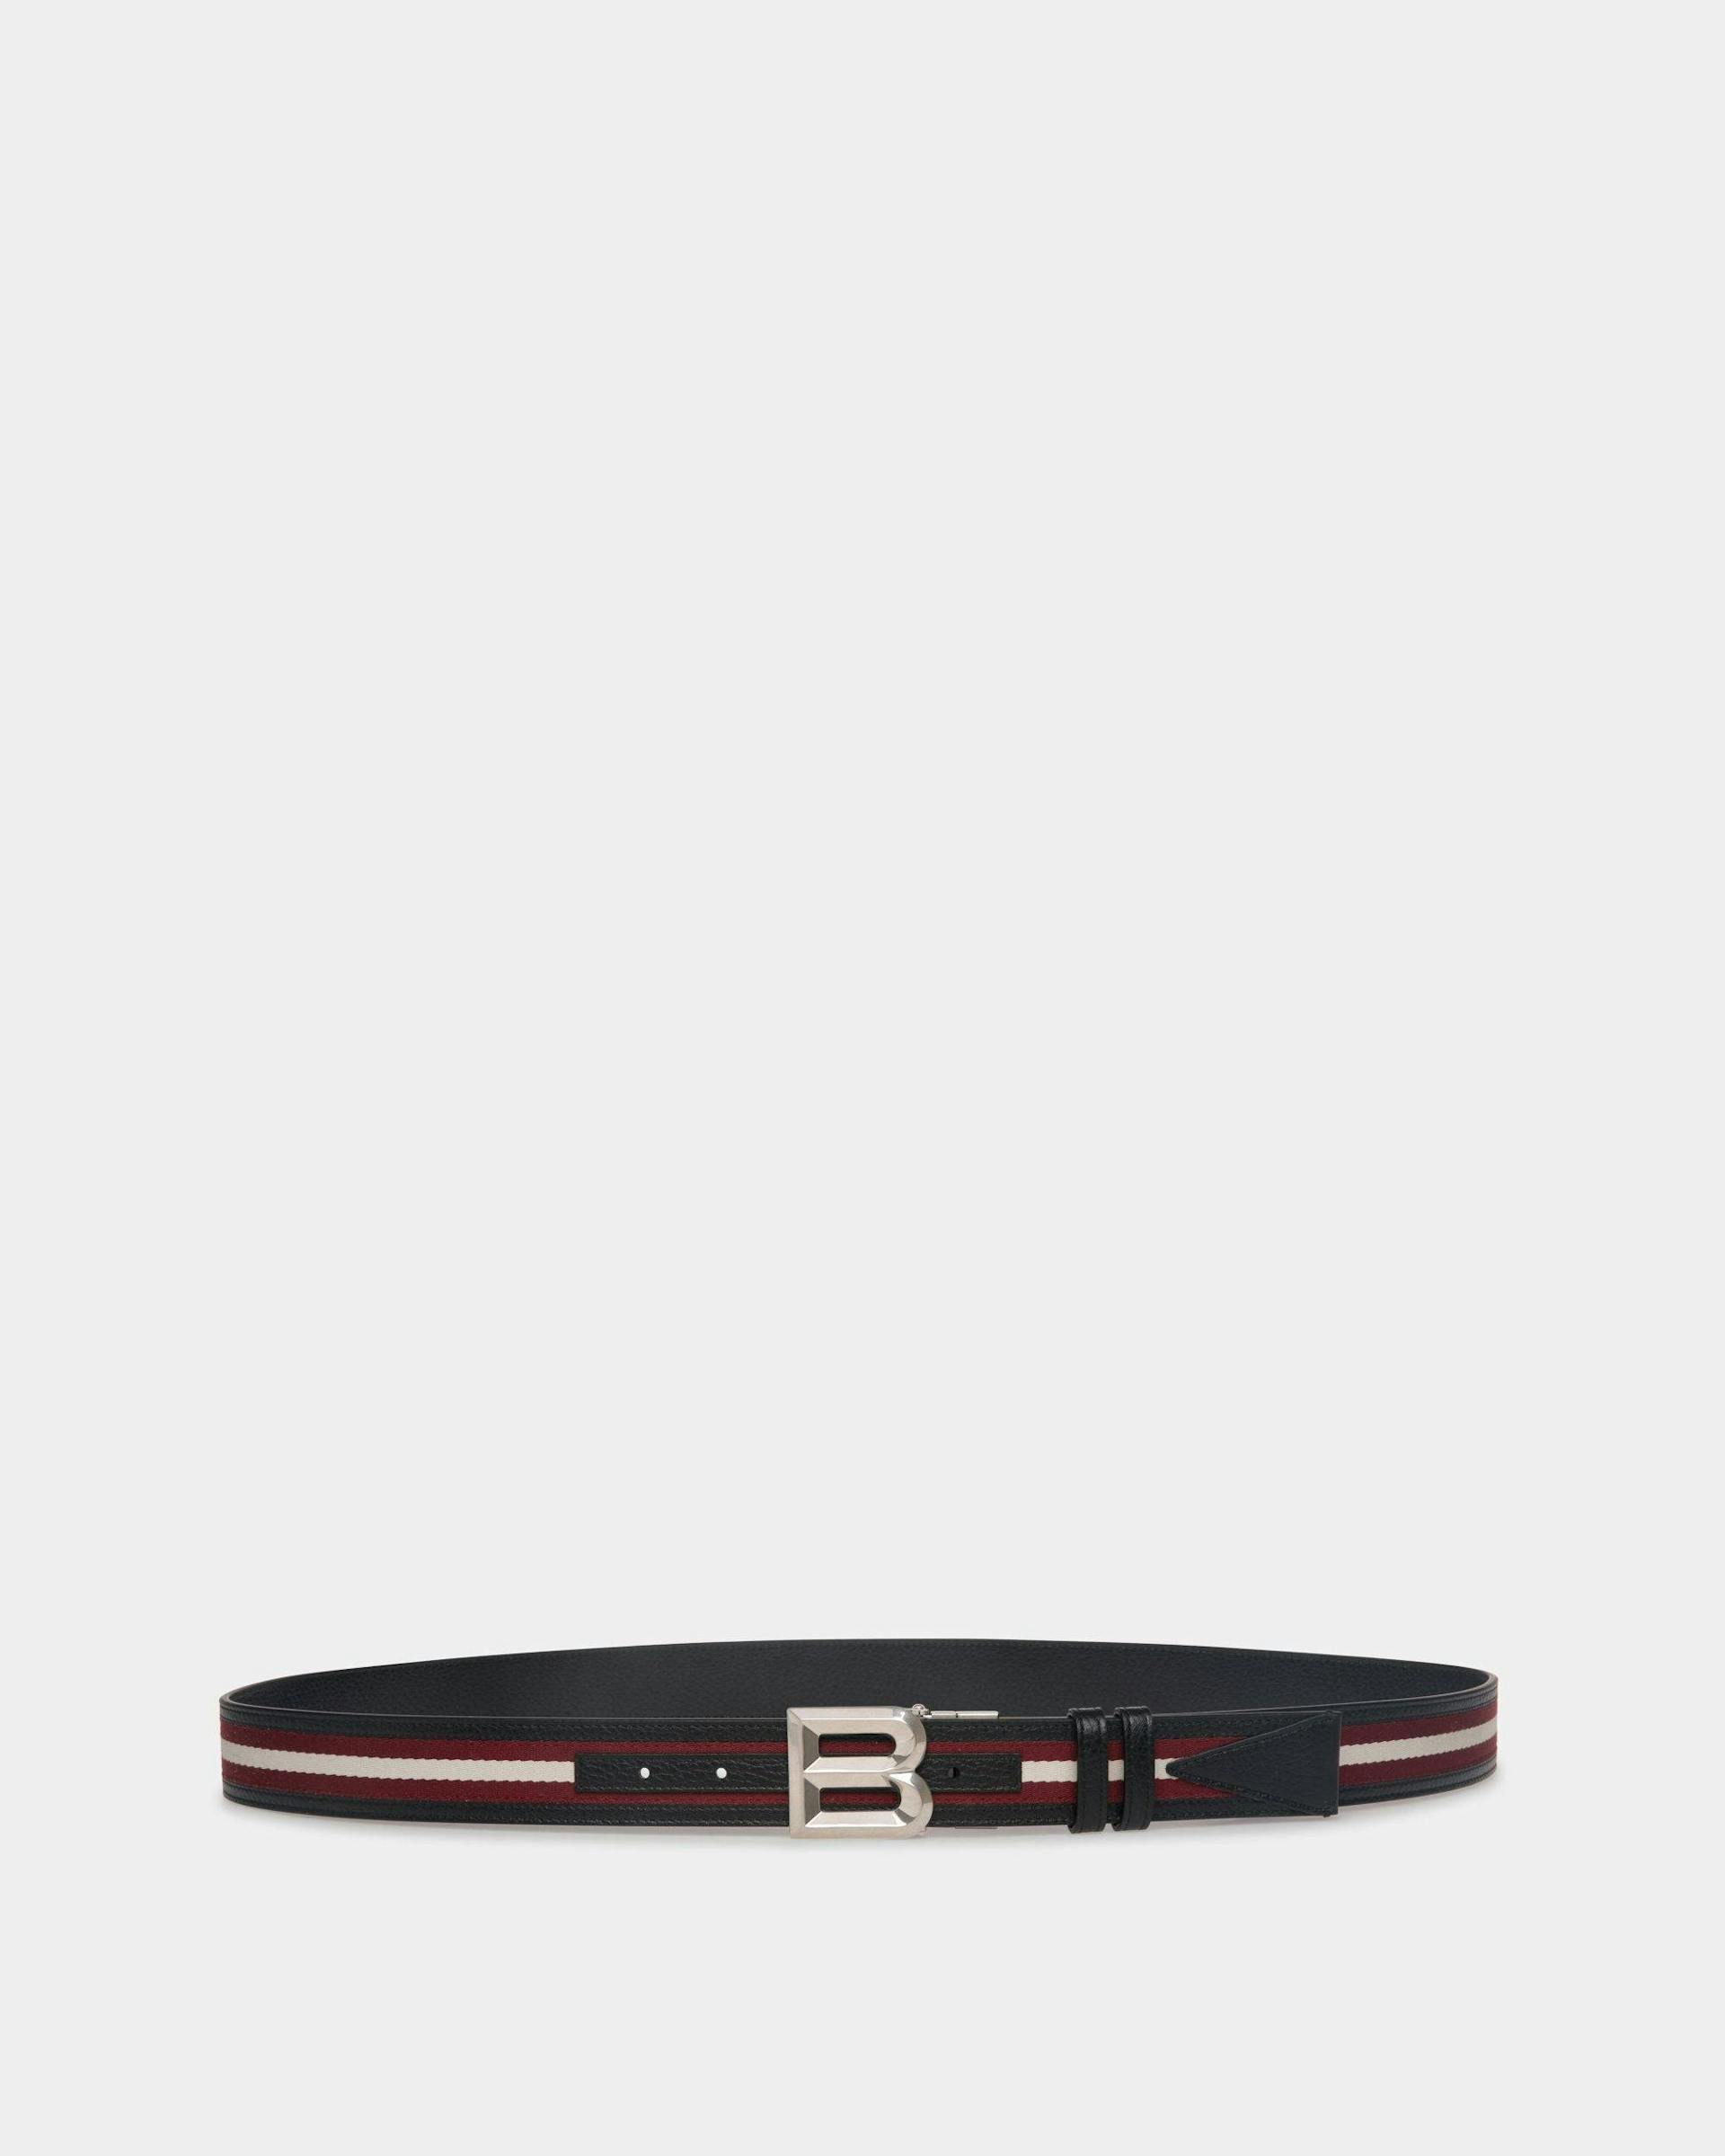 Men's B Bold 35mm Reversible Belt in Red White Red Fabric And Leather | Bally | Still Life Front